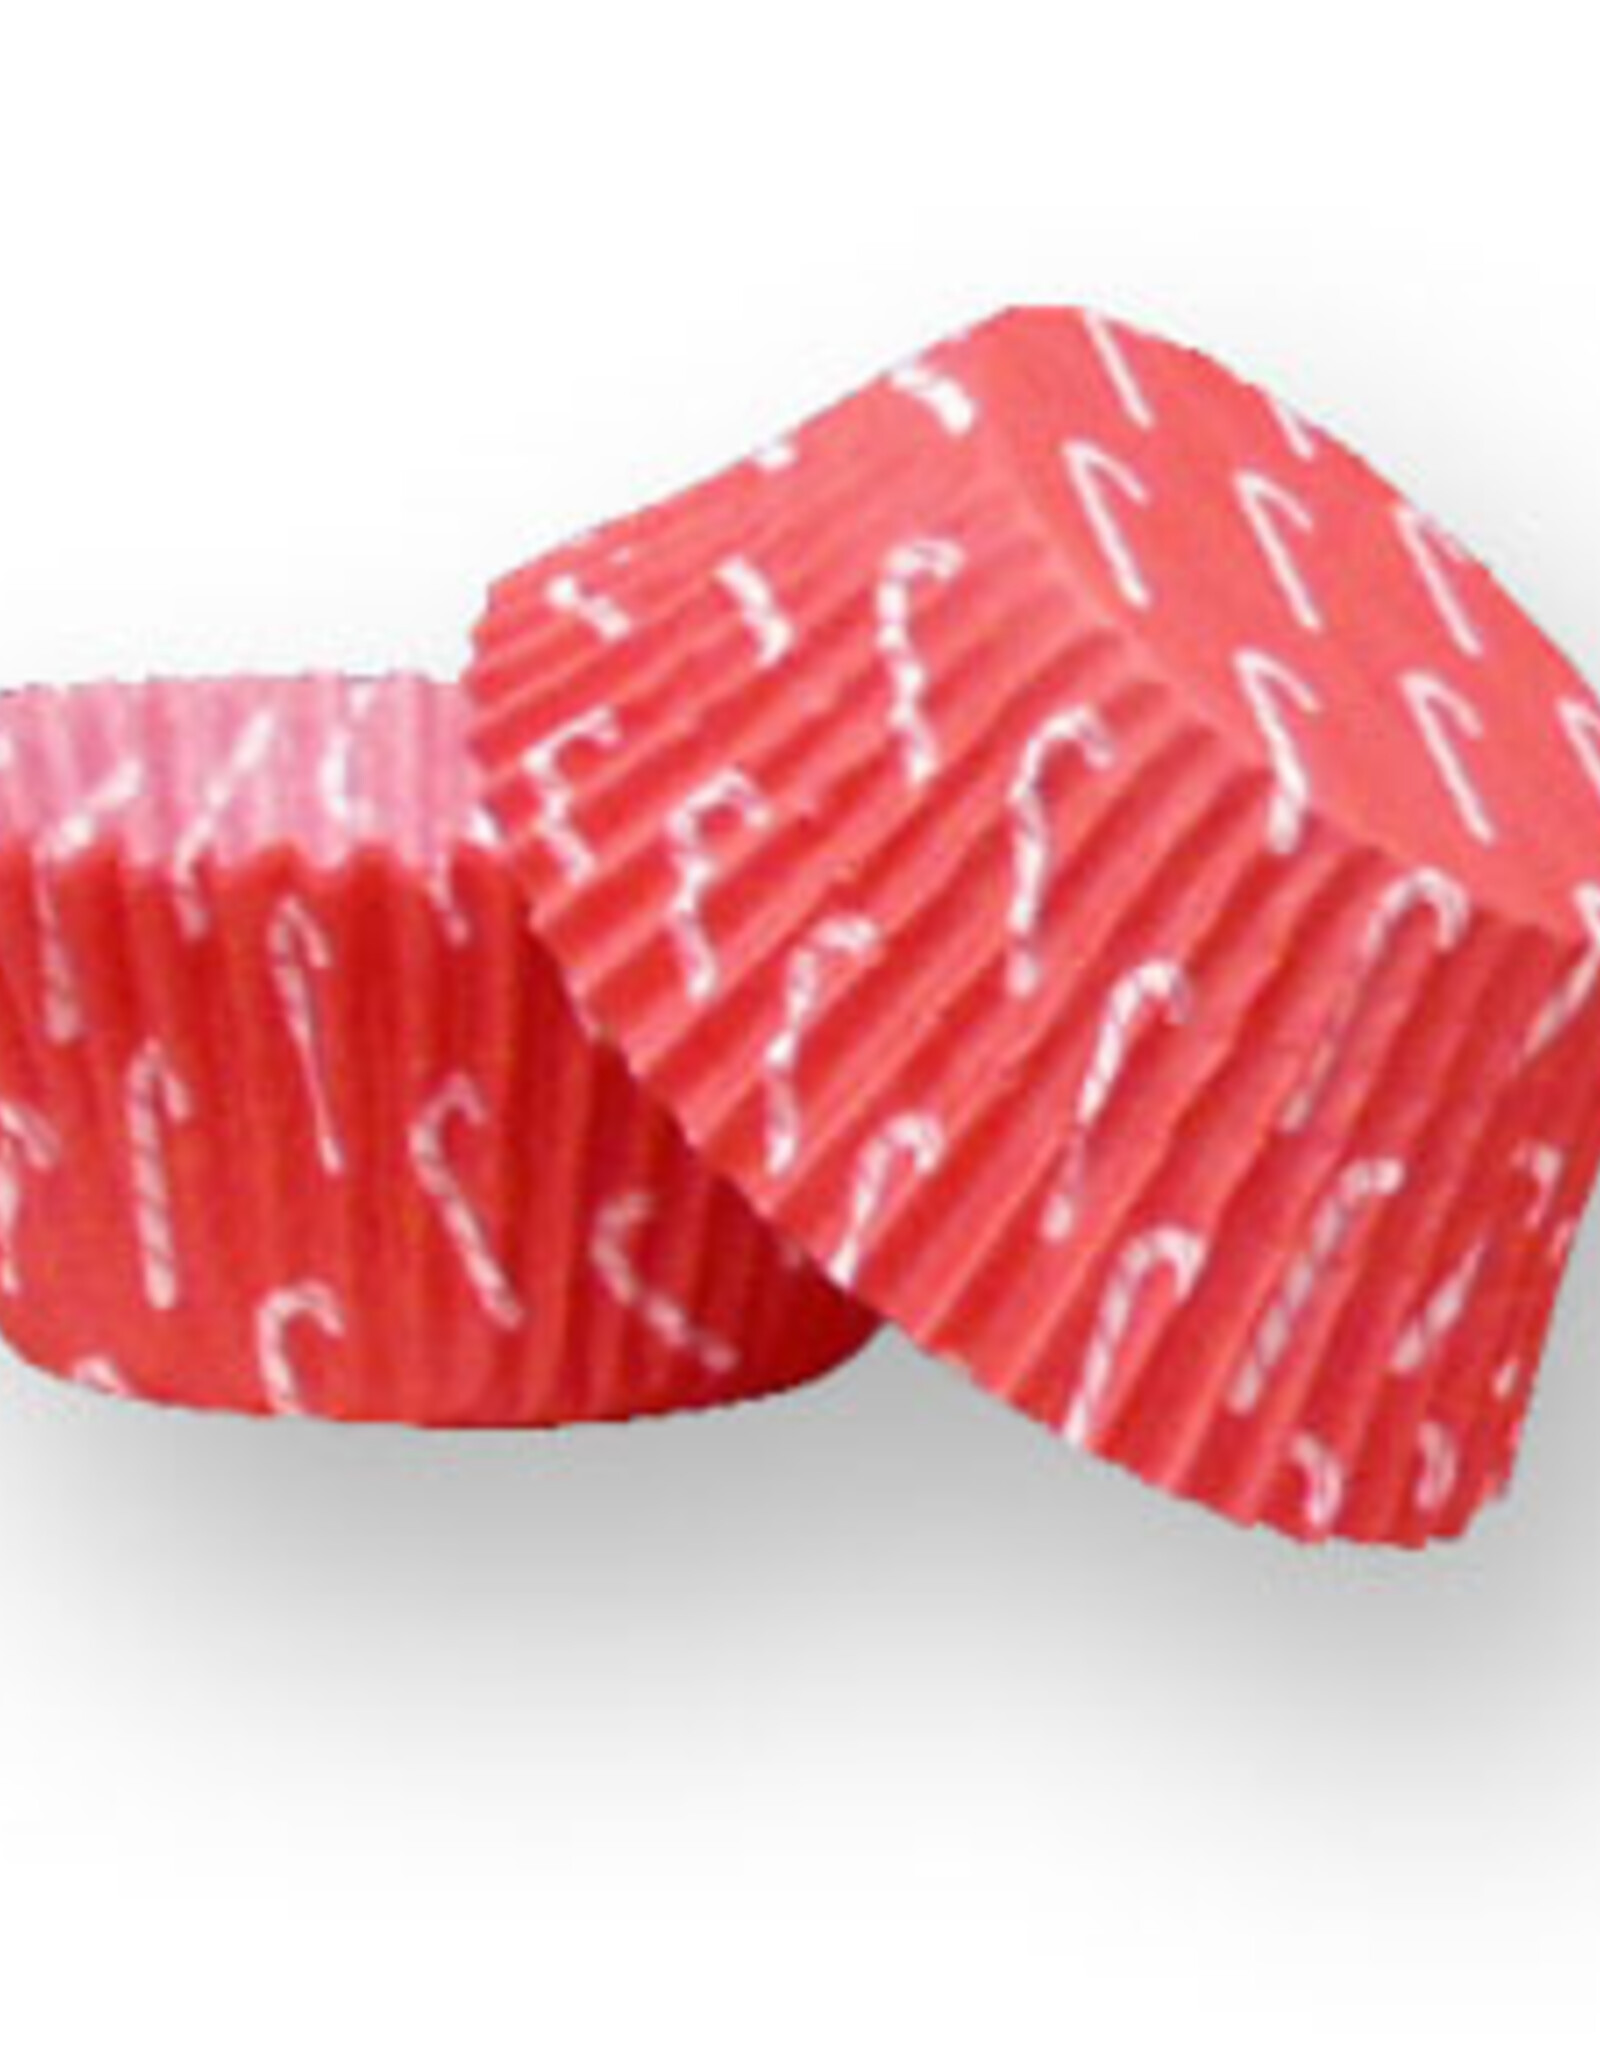 Red Candy Cane Baking Cup (30-35ct)